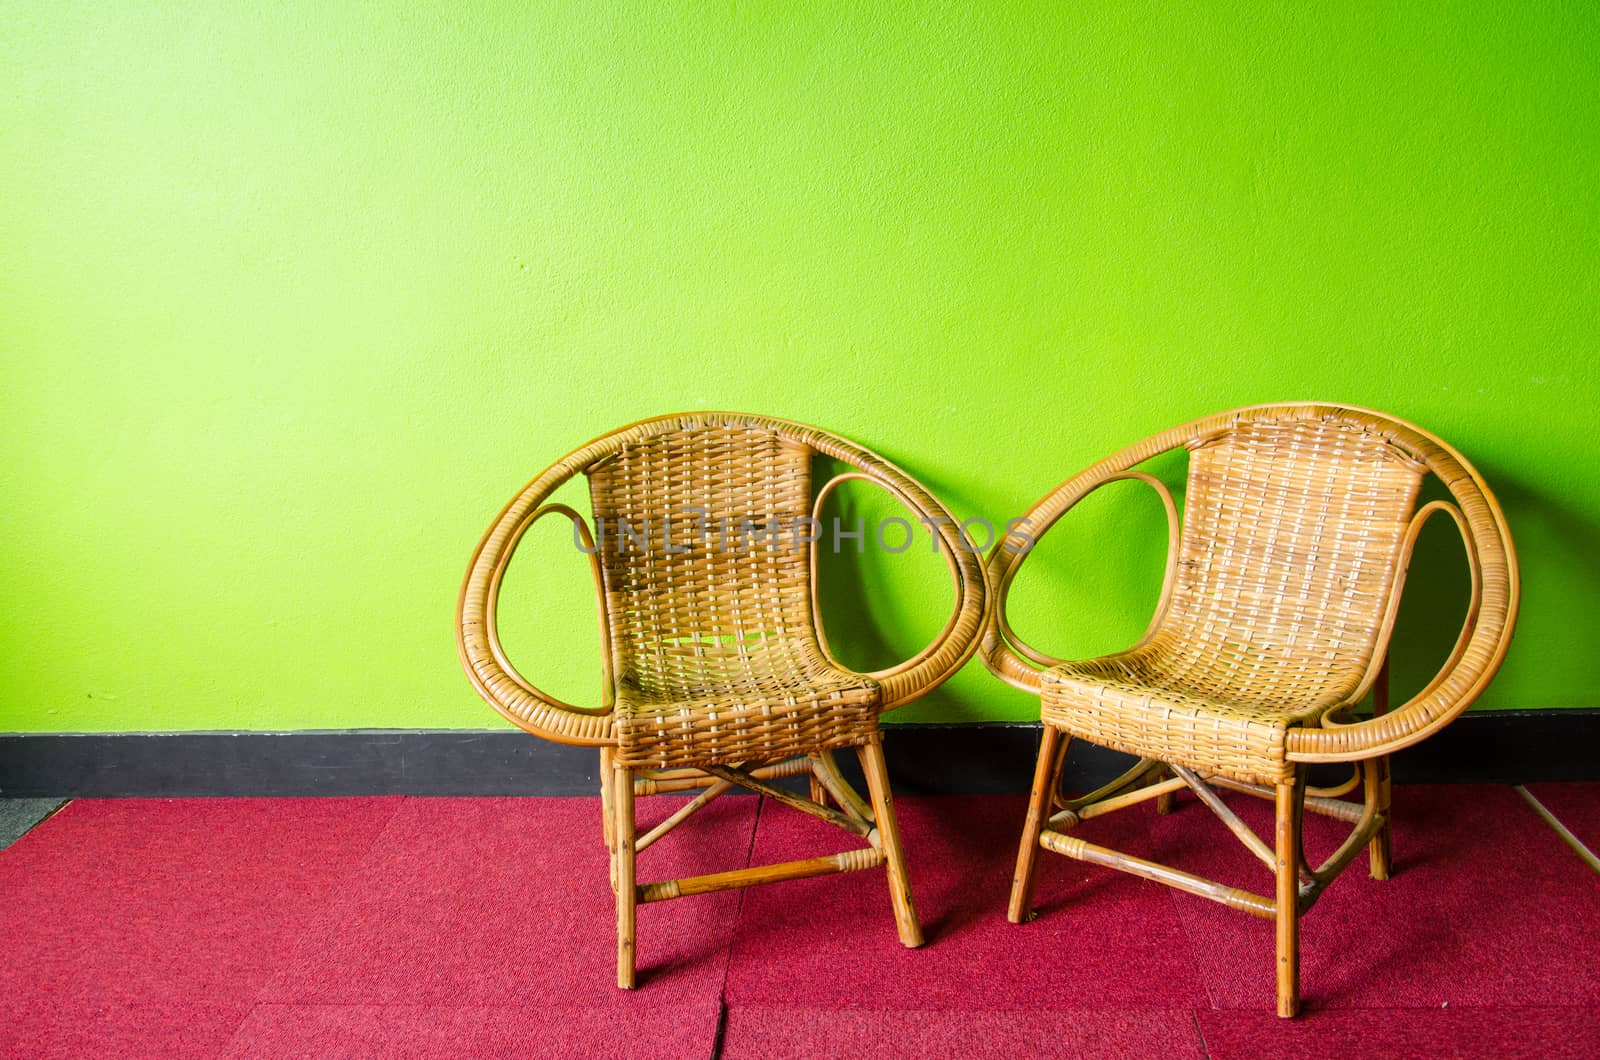 Two Chairs in the Green Room by migrean